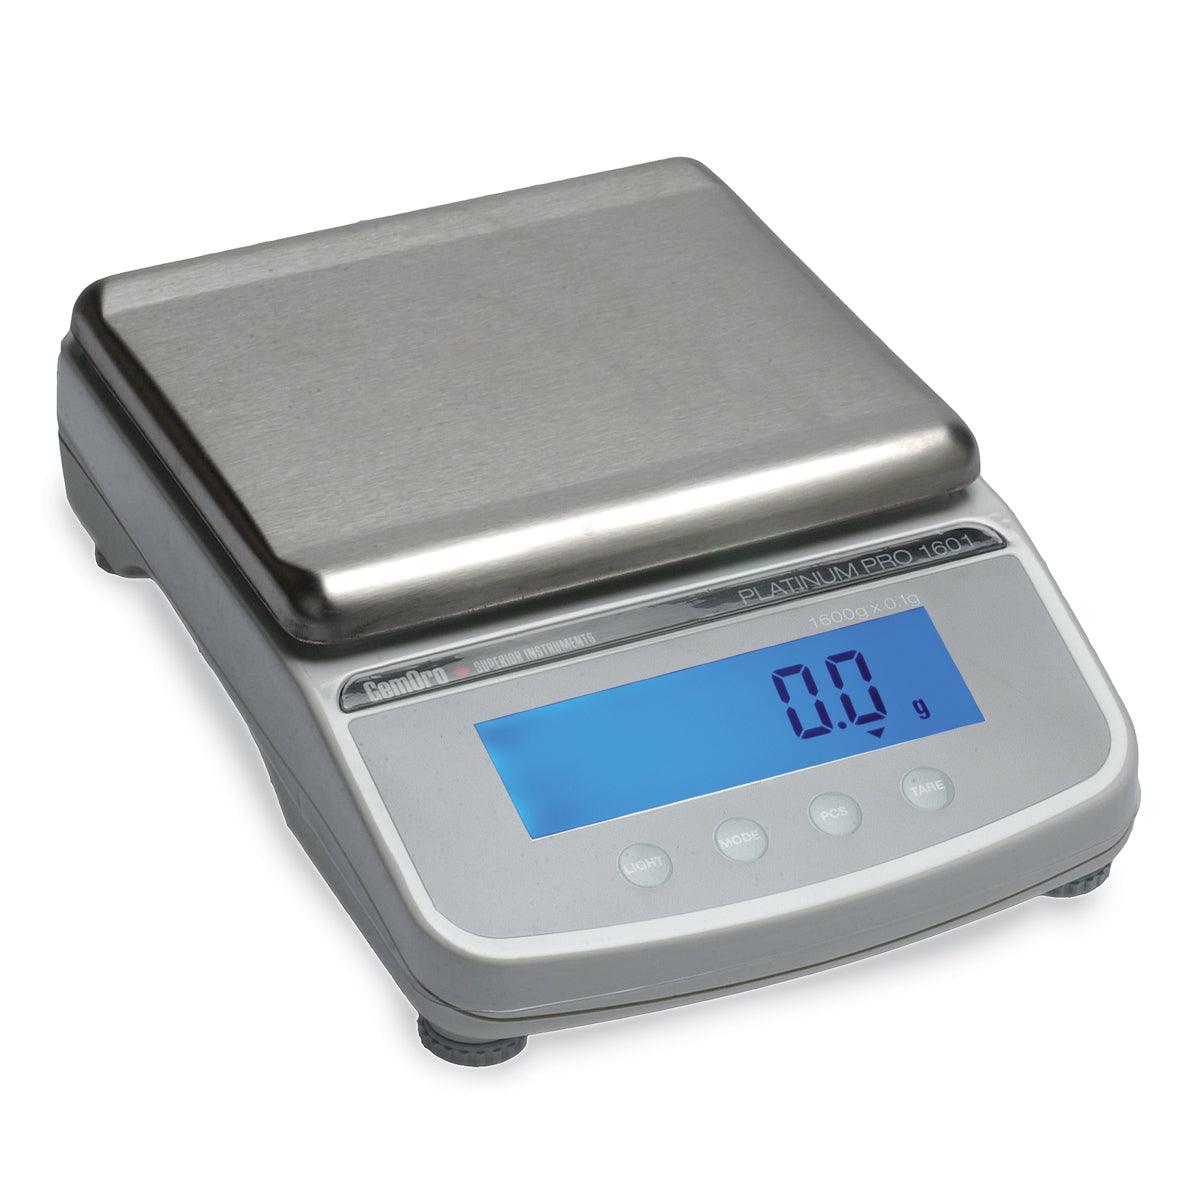 GemOro Professional Series Digital Countertop Scale - Findings Outlet